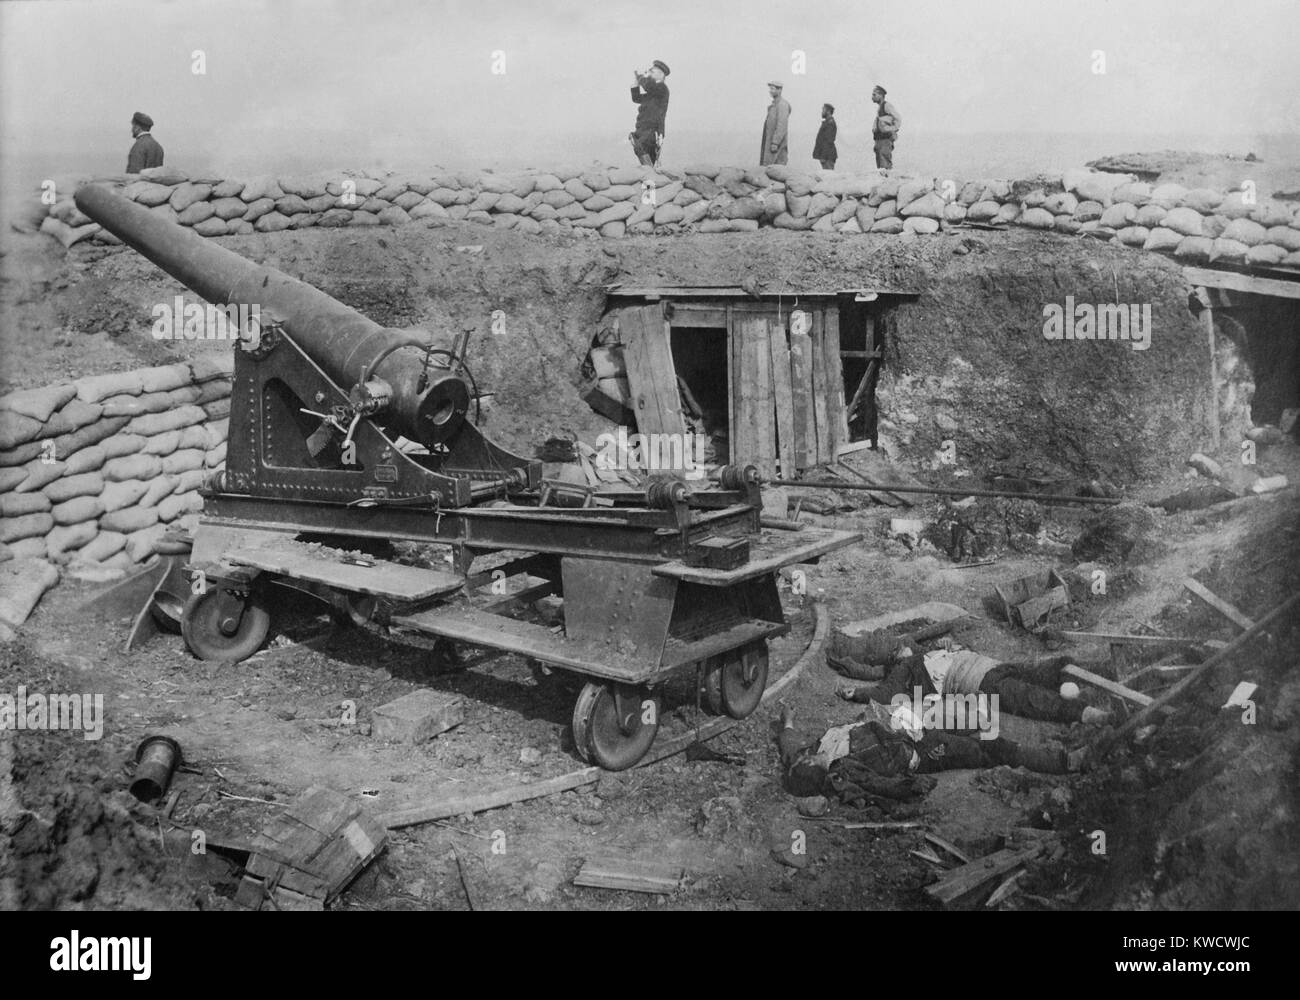 Siege of Ottoman Adrianople (Edirne) by Bulganian and Serbian forces, Nov. 3, 1912 –March 26, 1913. Captured Ottoman siege battery with dead Turkish soldiers (BSLOC 2017 1 142) Stock Photo